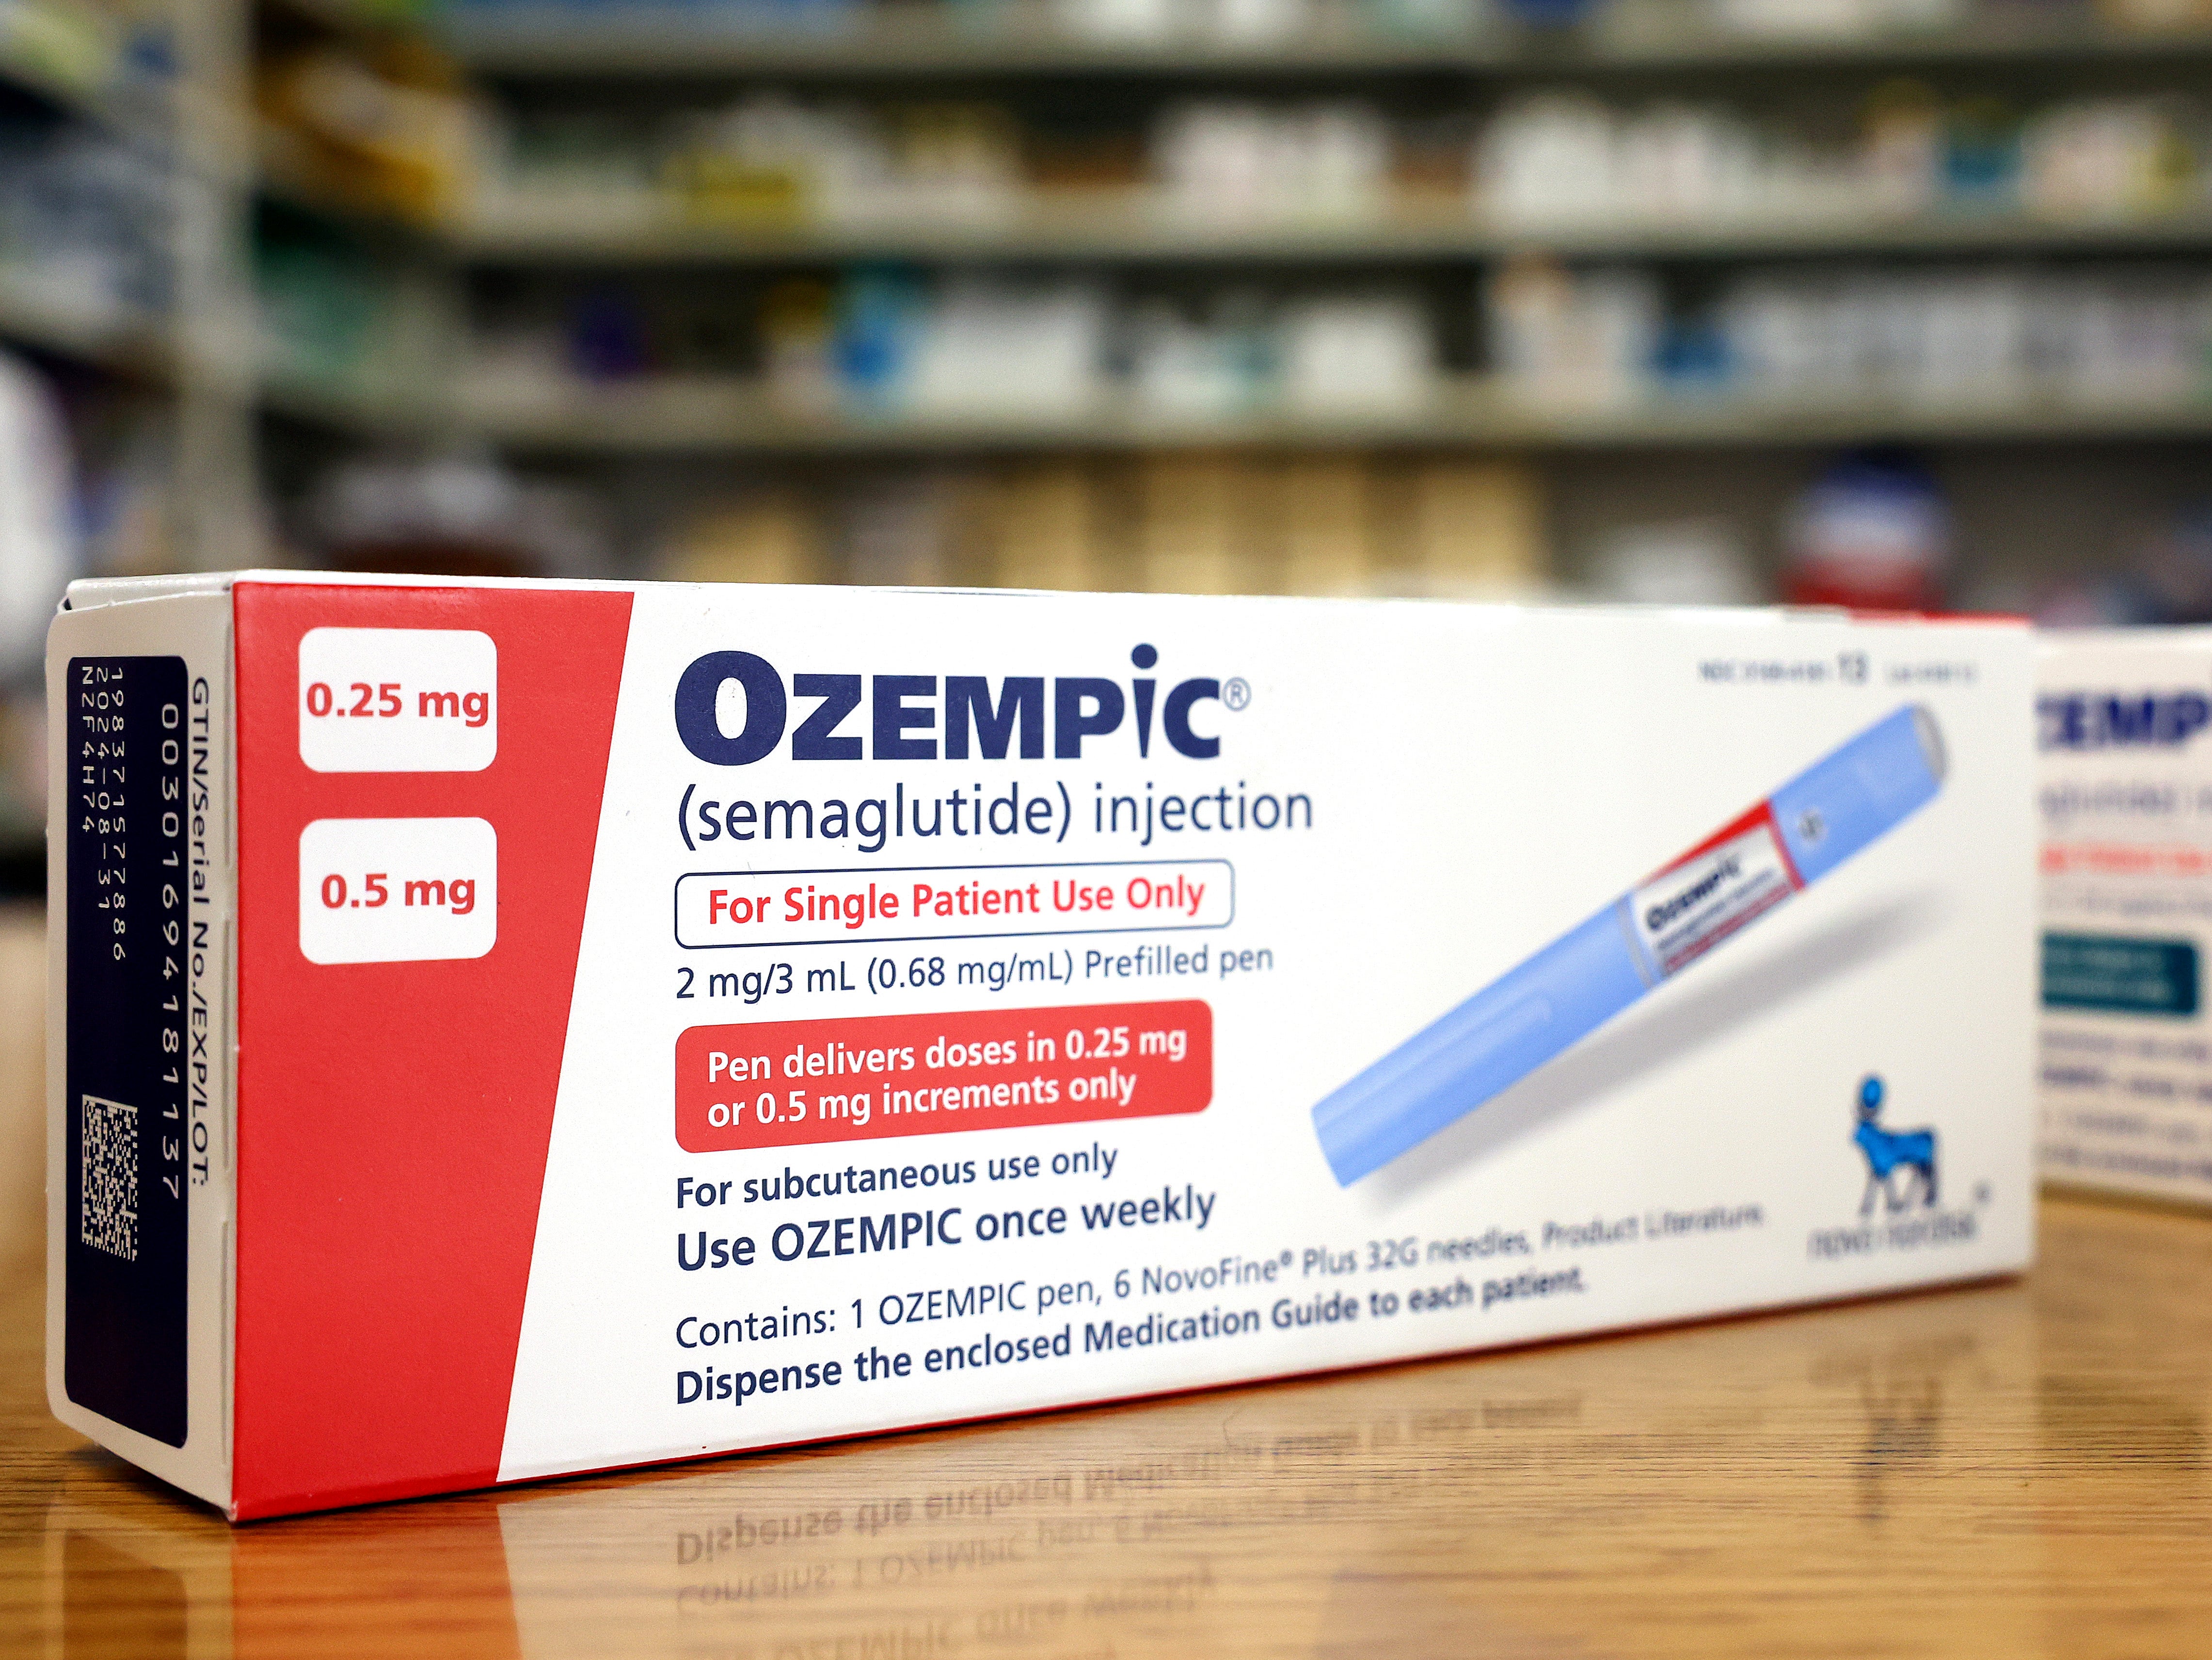 Semaglutide (ozempic) is licensed to treat obesity under the brand name Wegovy